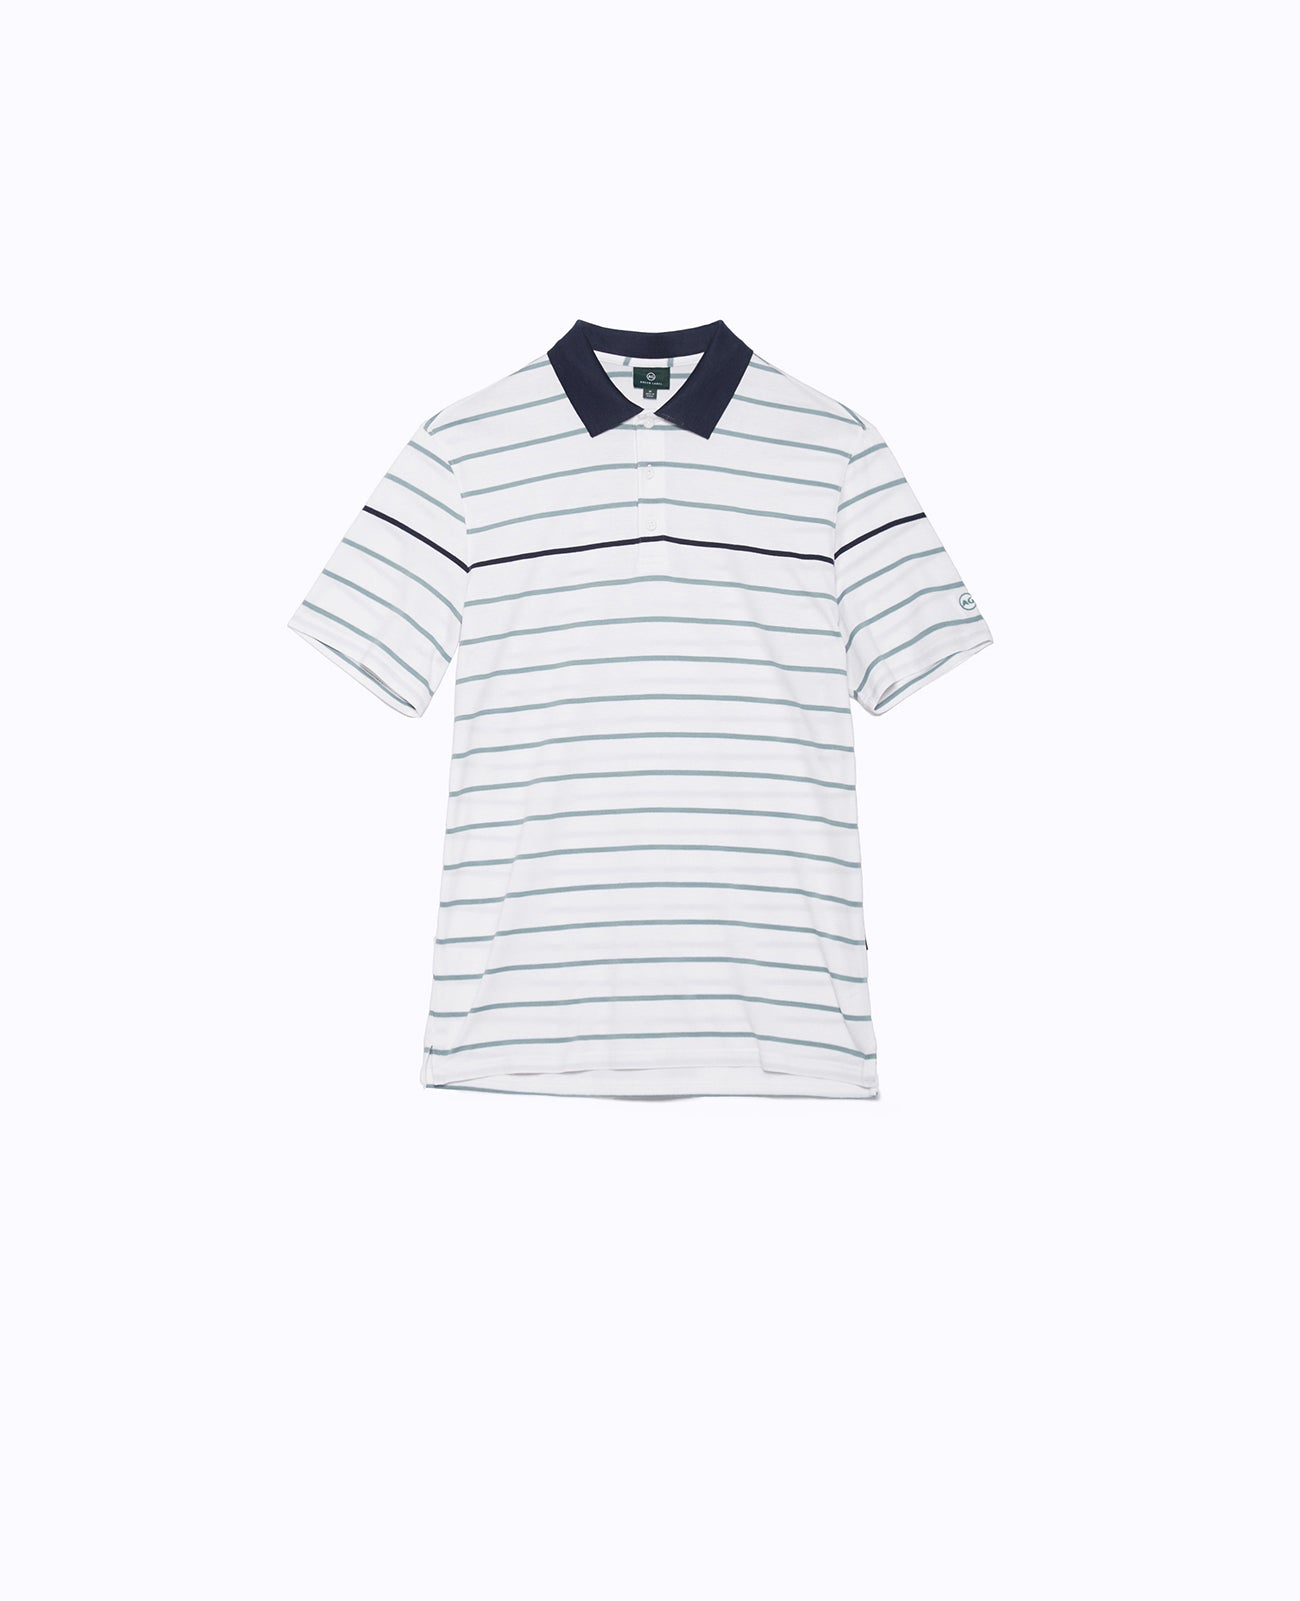 Farrell Stripe Polo Bright White Agave Green Naval Green Label Collection Men Tops Photo 6